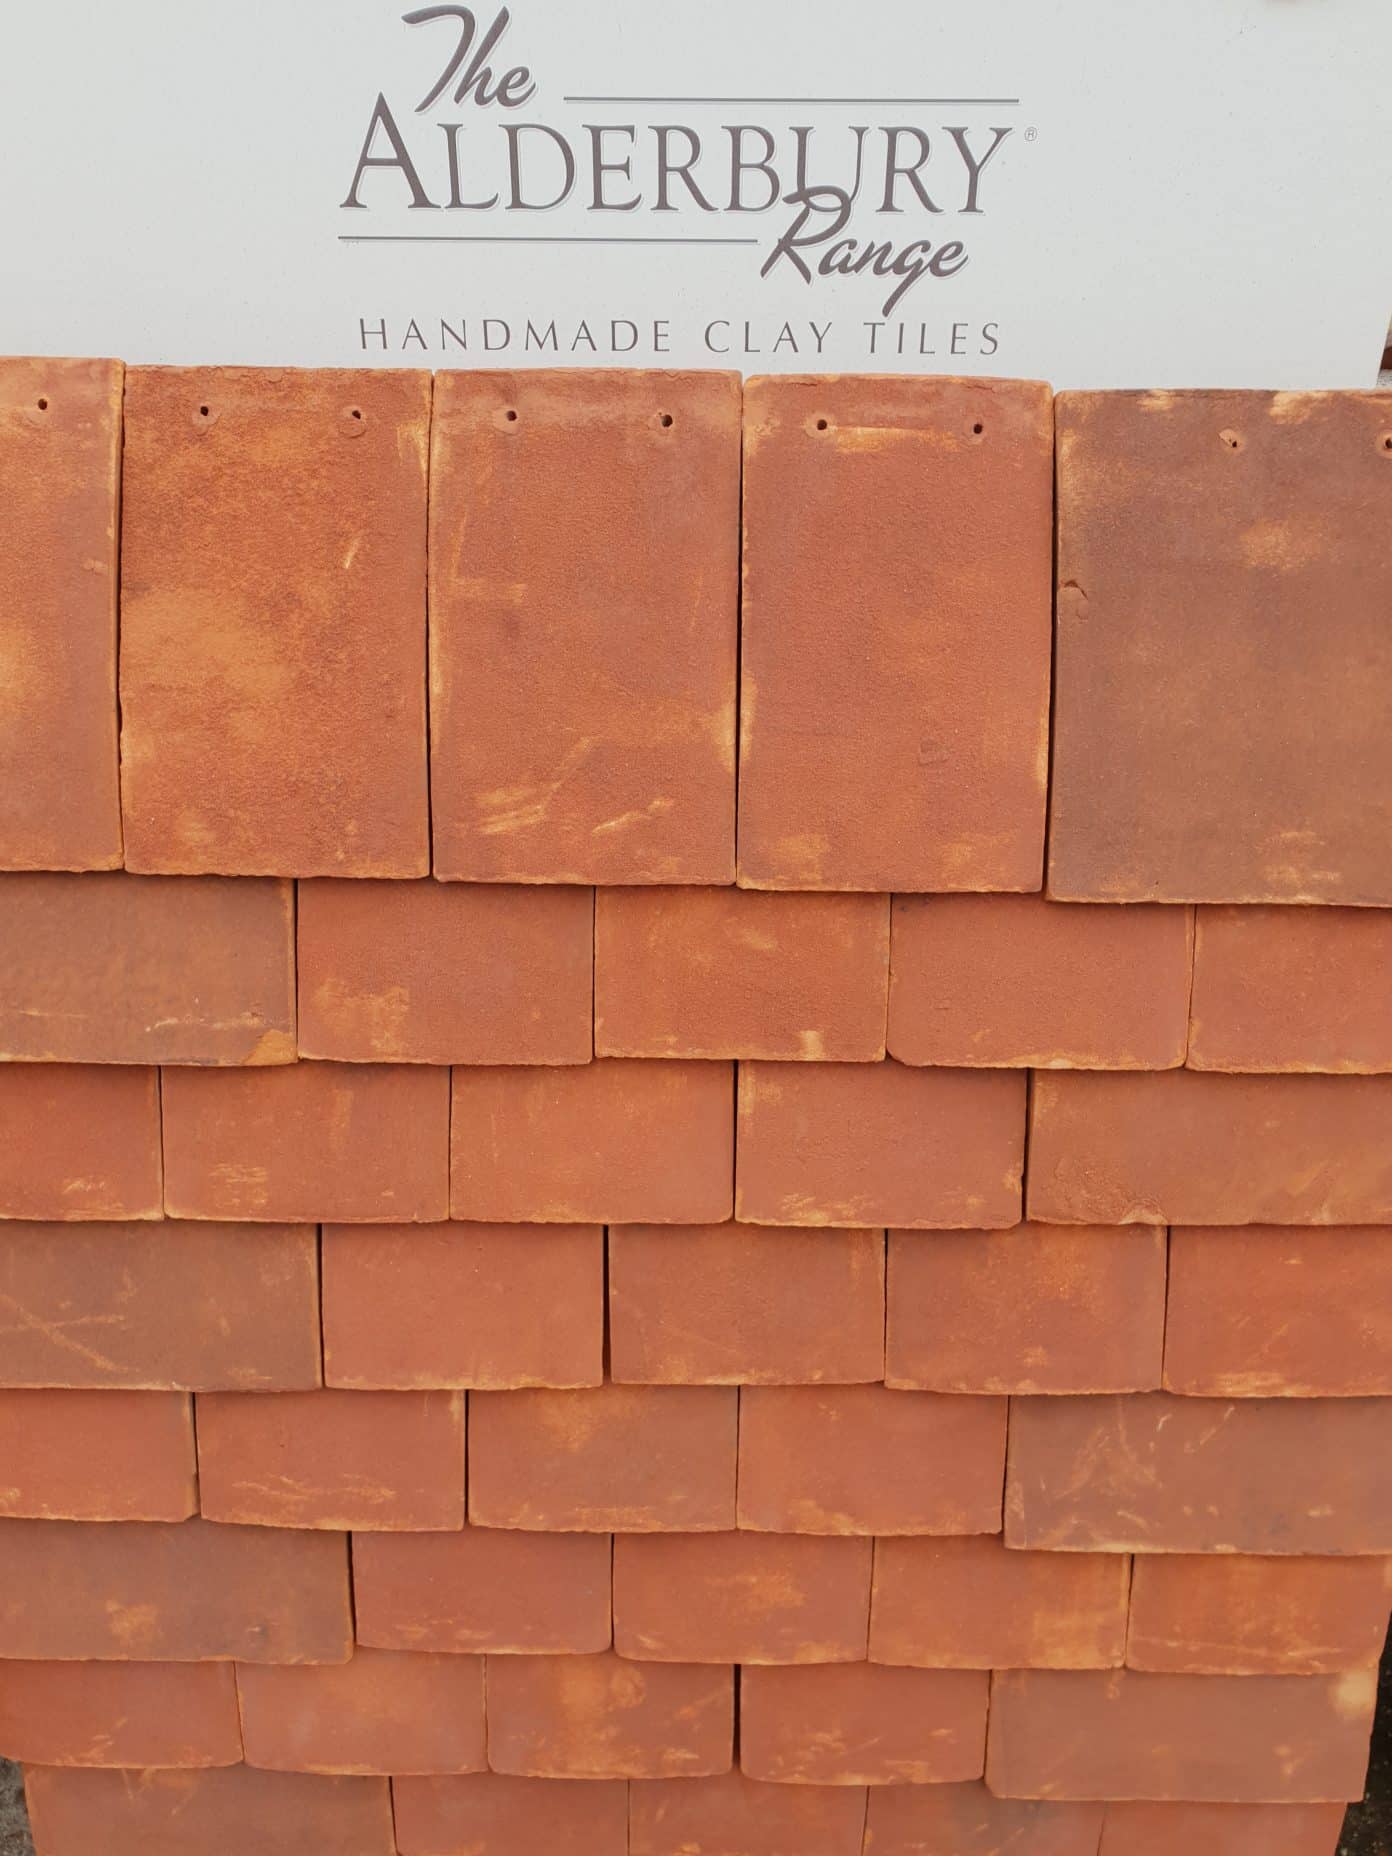 New Alderbury Handmade Clay Tile Range | Clay and Slate Roofing Products